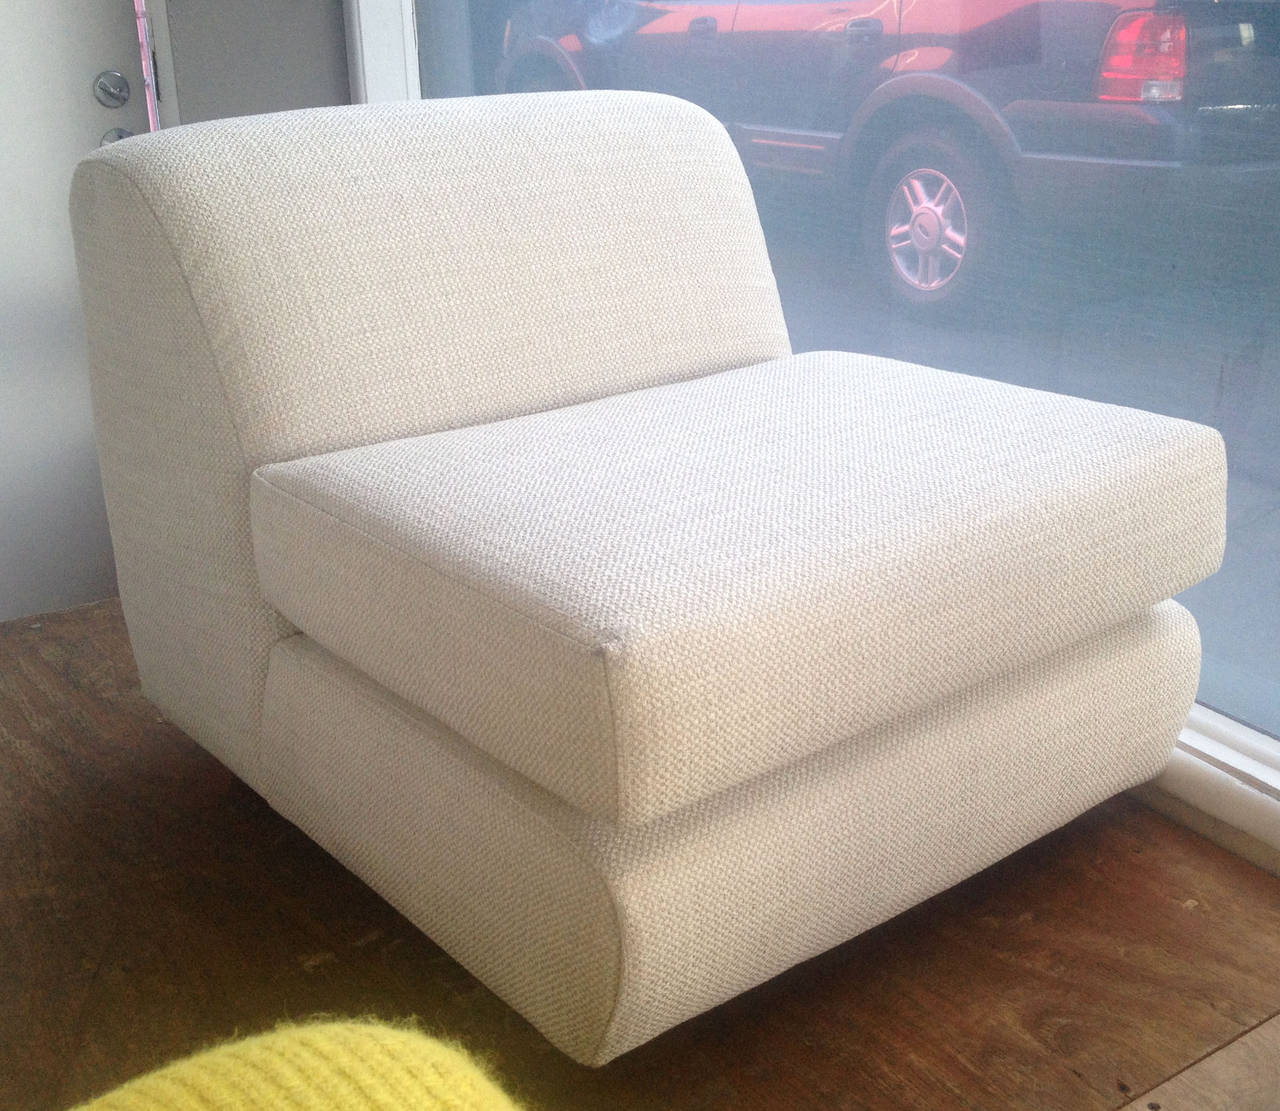 A pair of slipper chairs with a nice off-white tweed upholstery. Each rectangular chair is supported by four small wooden peg legs.